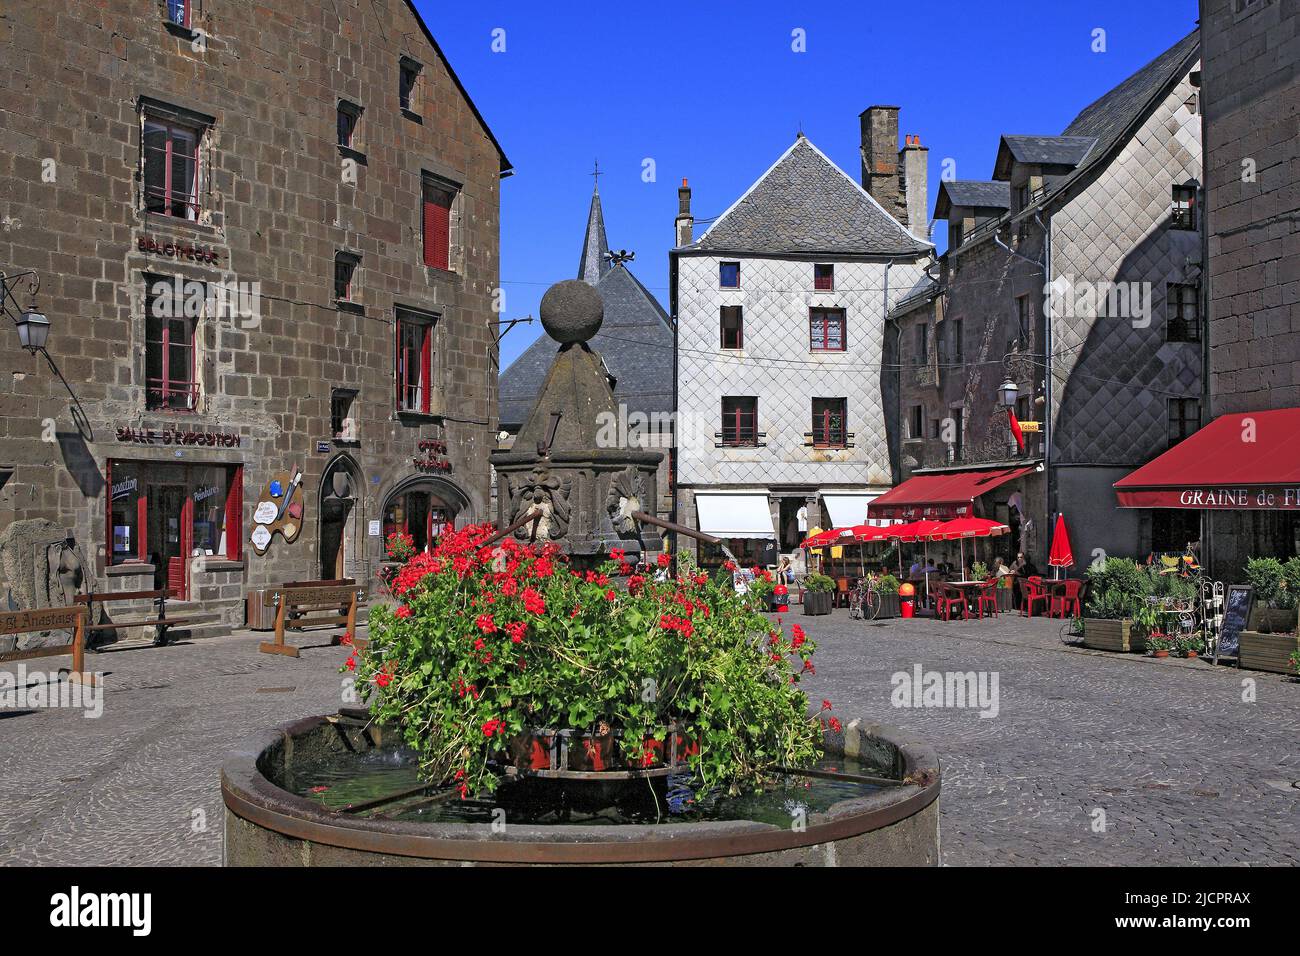 France, Puy-de-Dôme Besse-et-Saint-Anastaise, Besse-en-Chandesse, the fountain in the center of the village Stock Photo